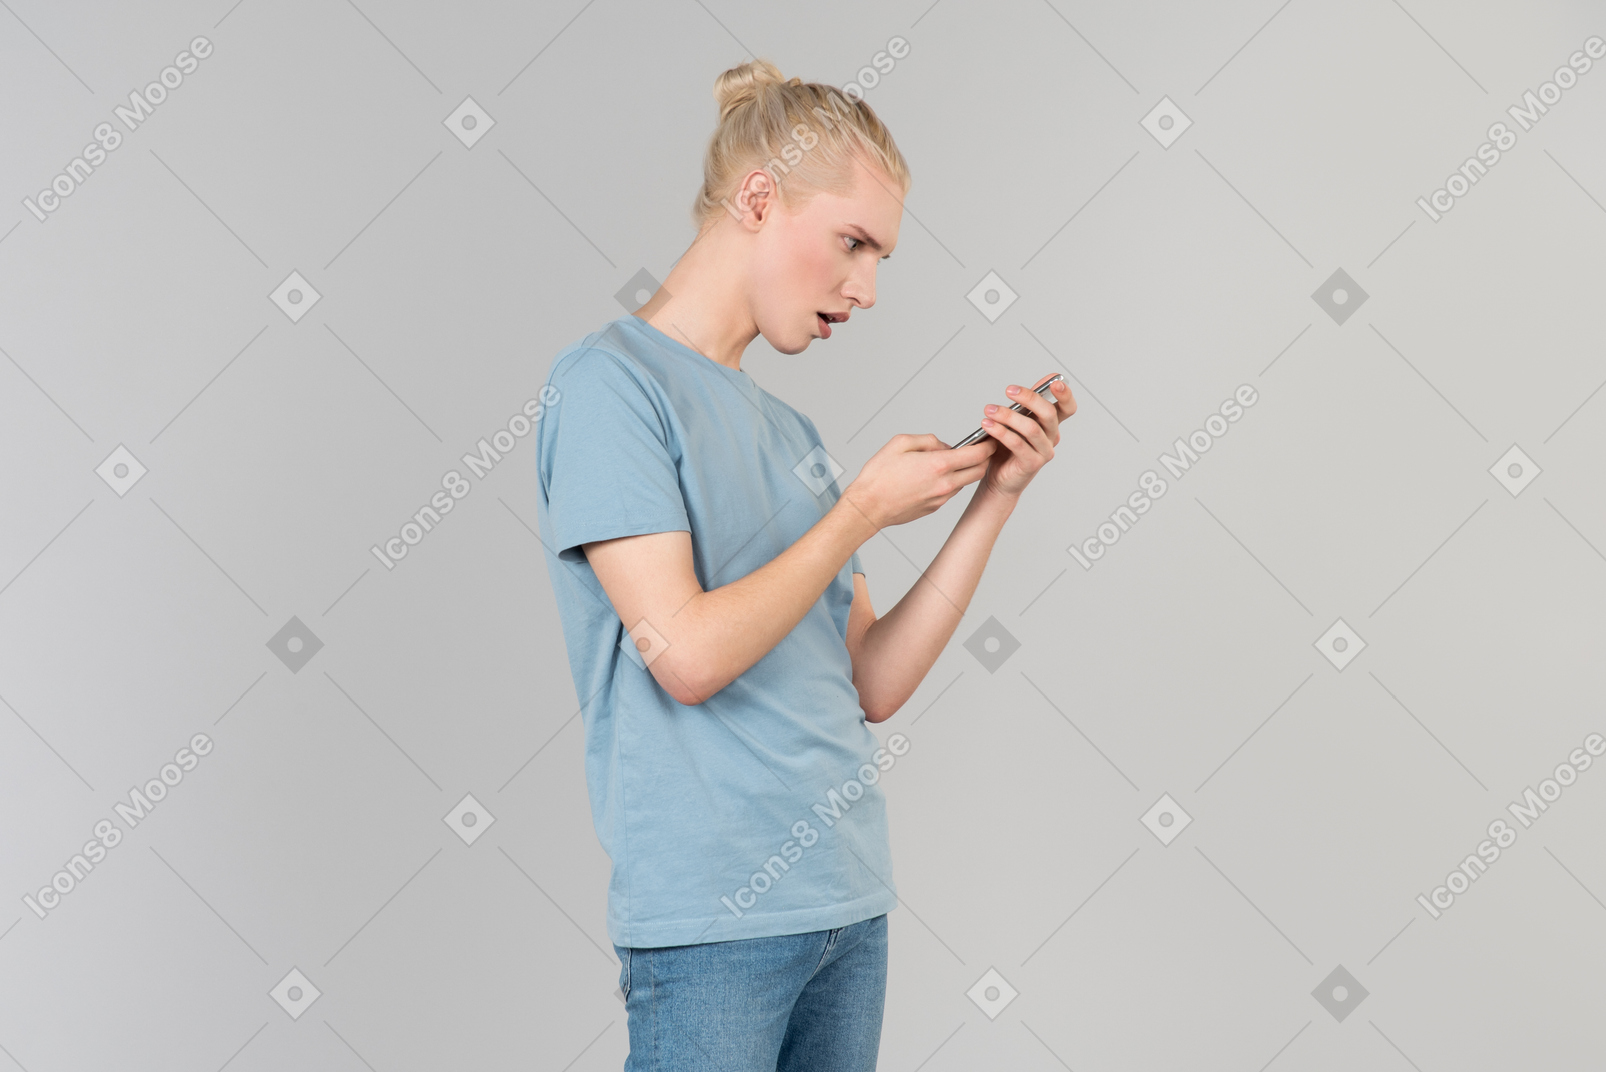 Shocked young guy standing in profile and looking aside